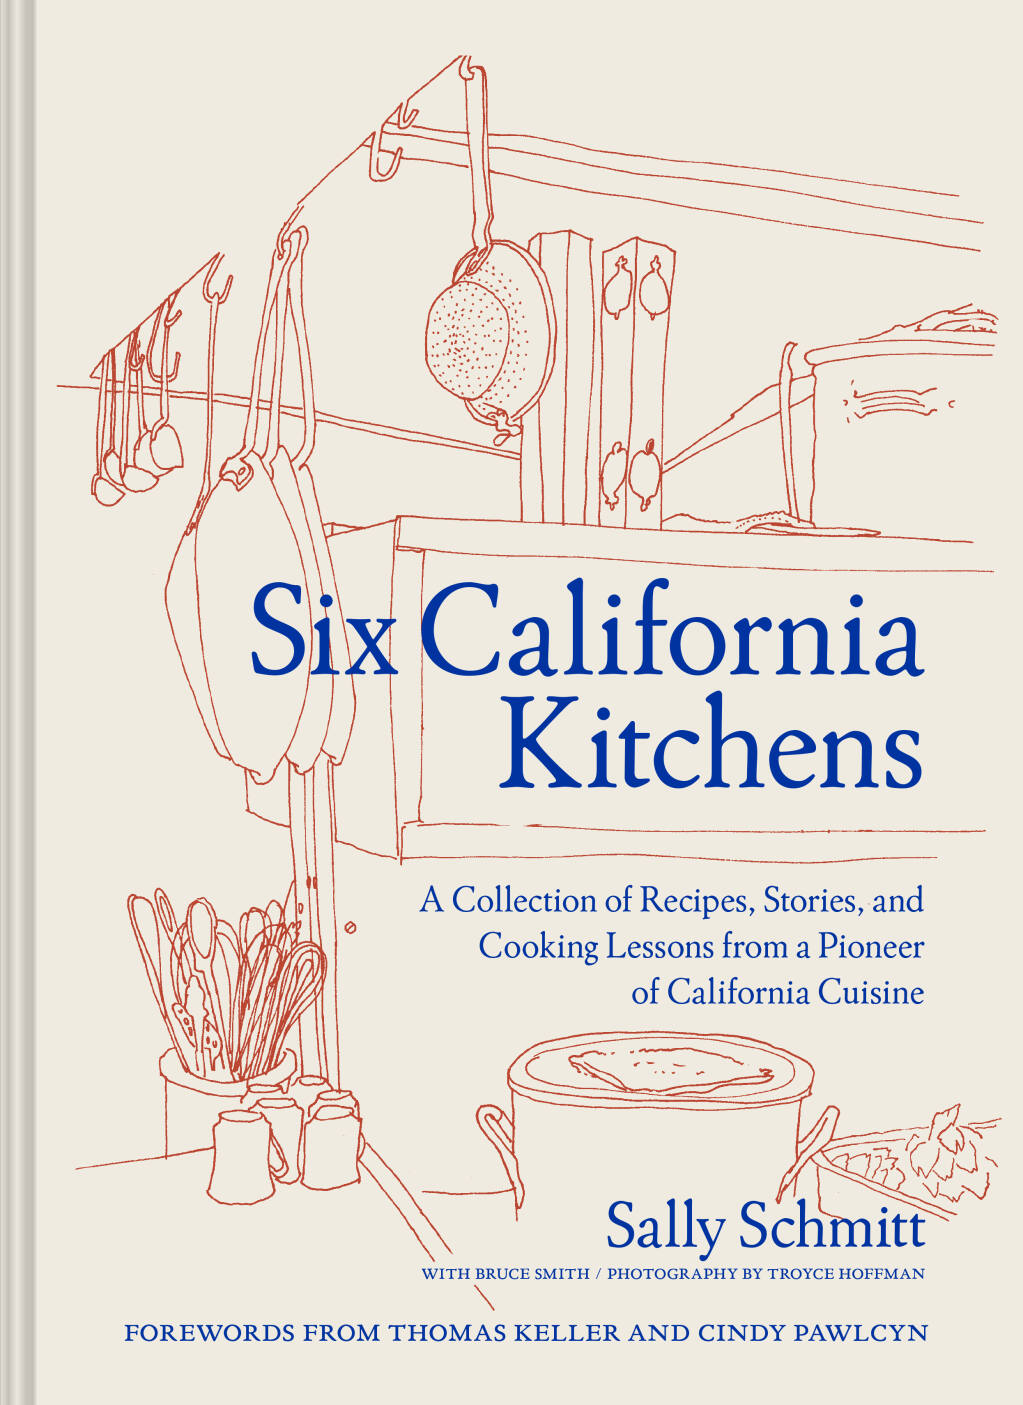 Sally Schmitt distilled the lessons she learned in her six California kitchens into a deeply moving memoir and deliciously personal cookbook released in April, “Six California Kitchens.” (Chronicle Books, $35)